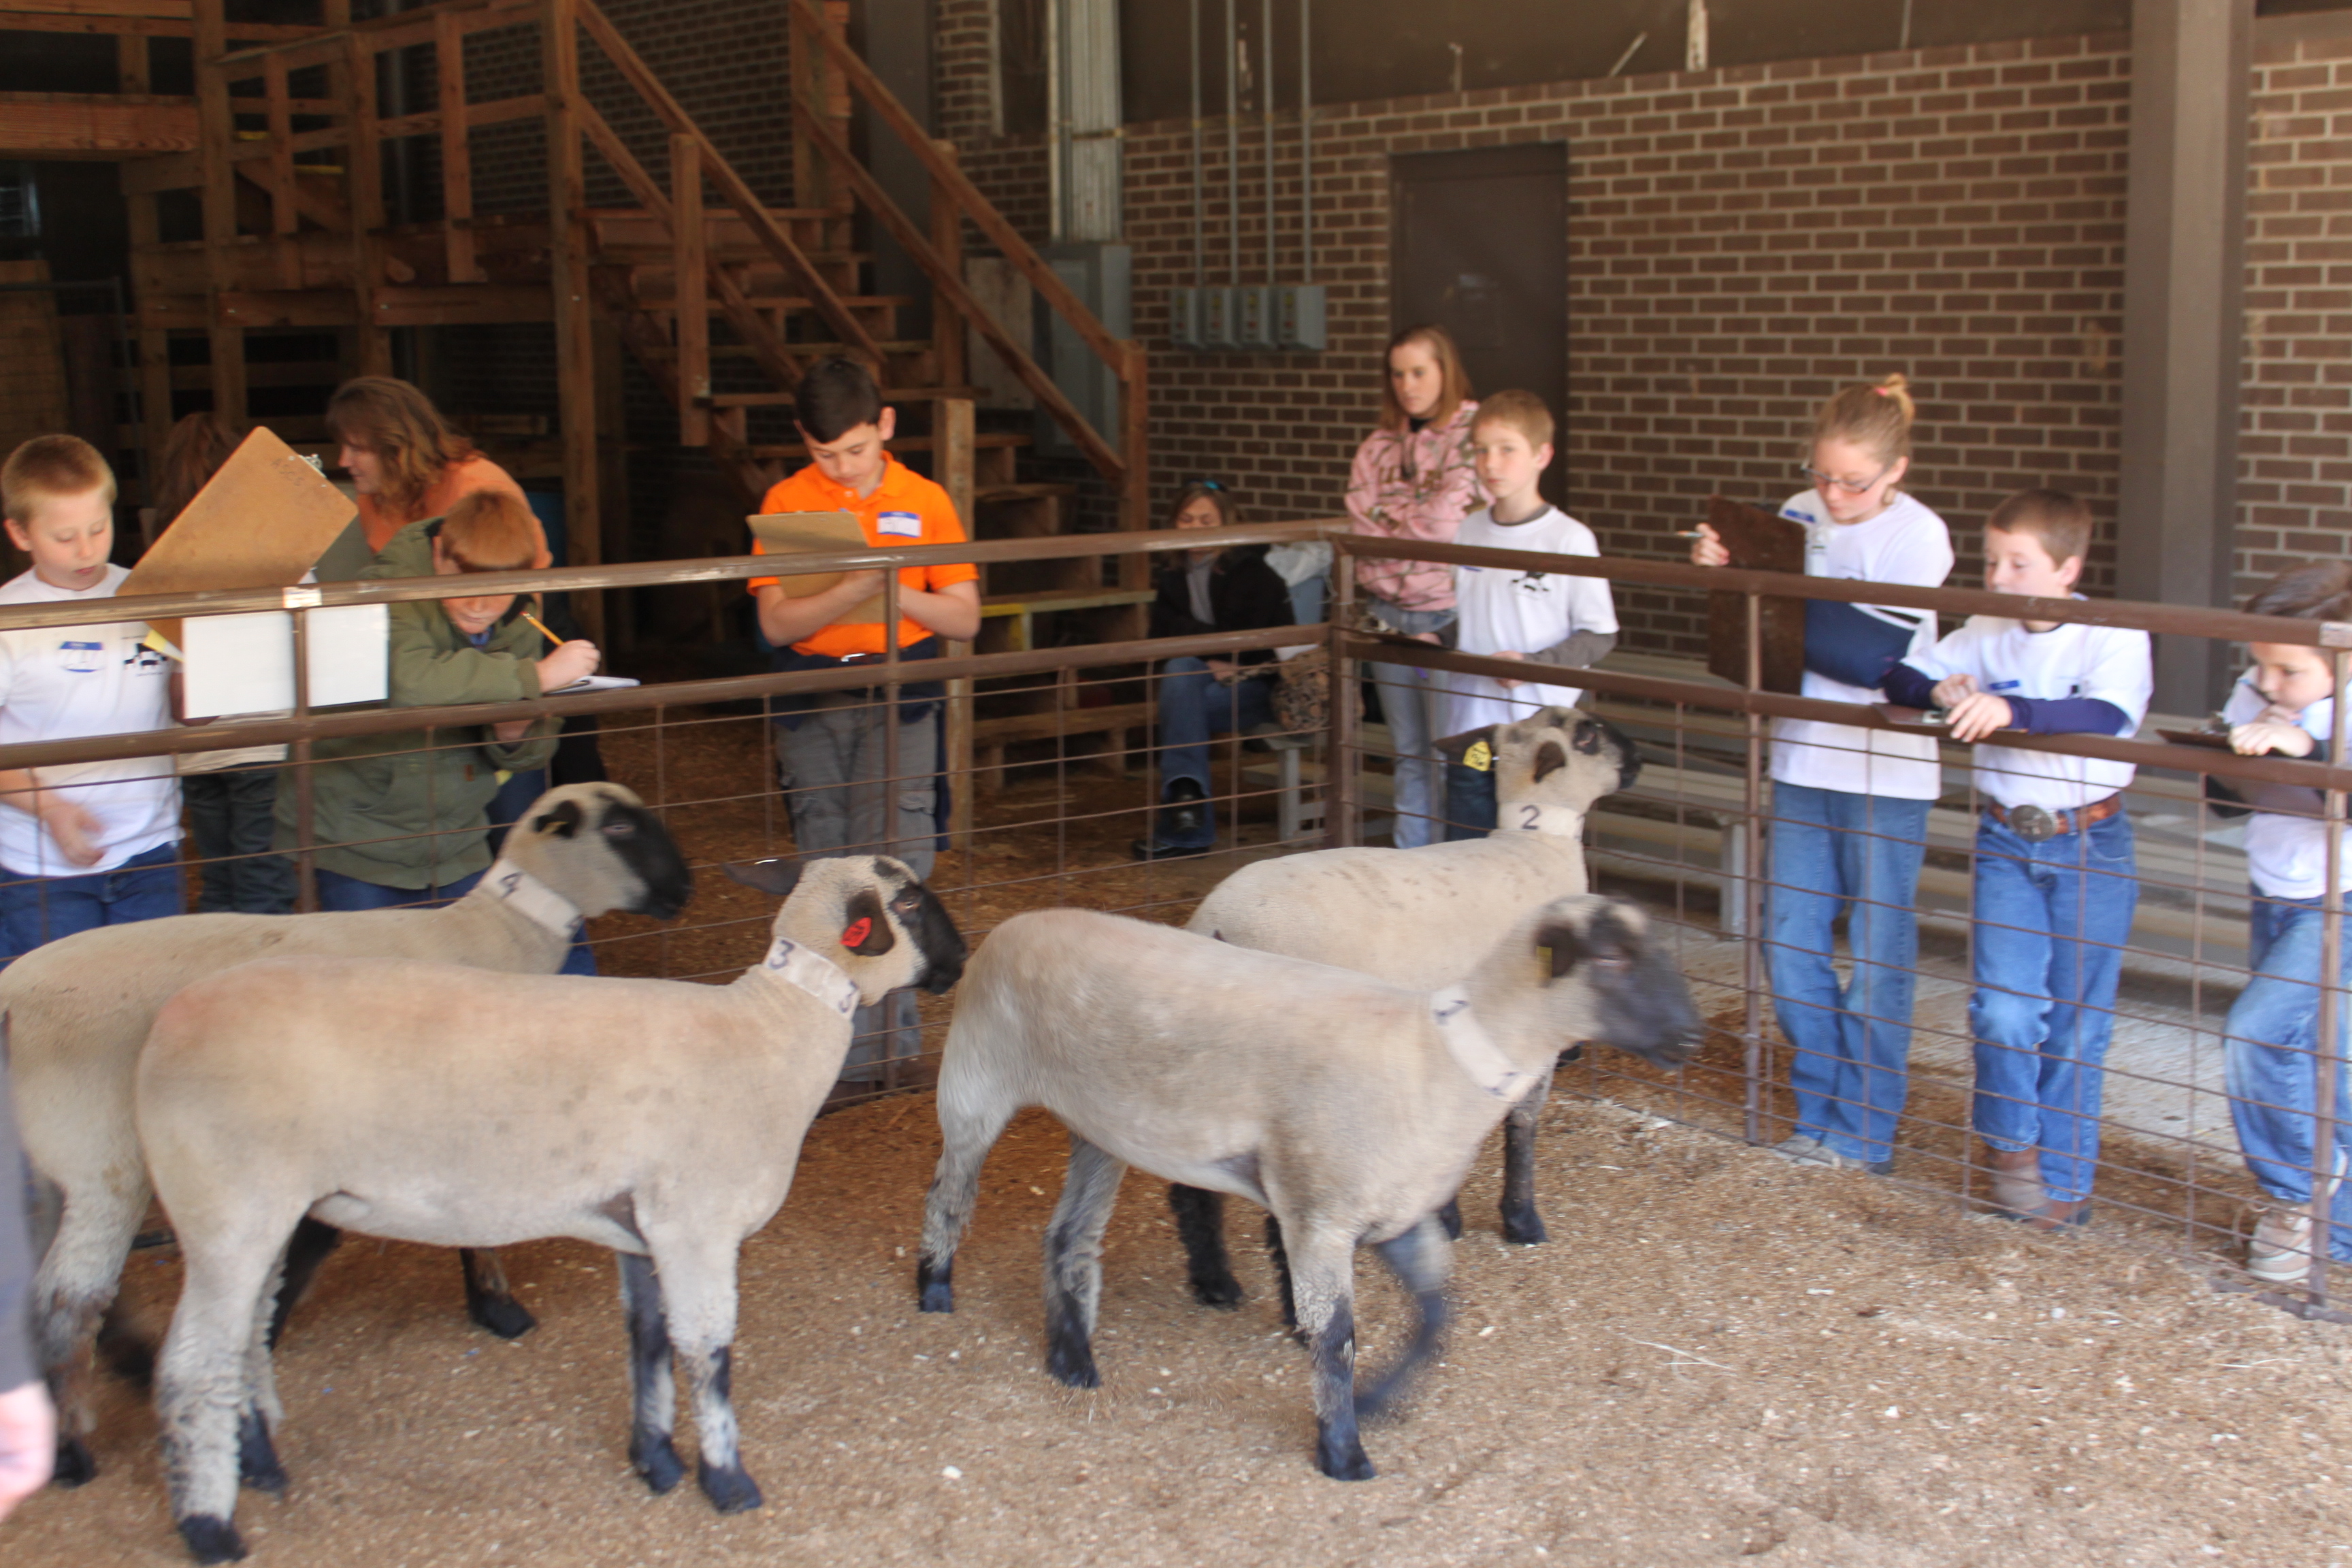 A group of youths stands around a paddock containing sheep.